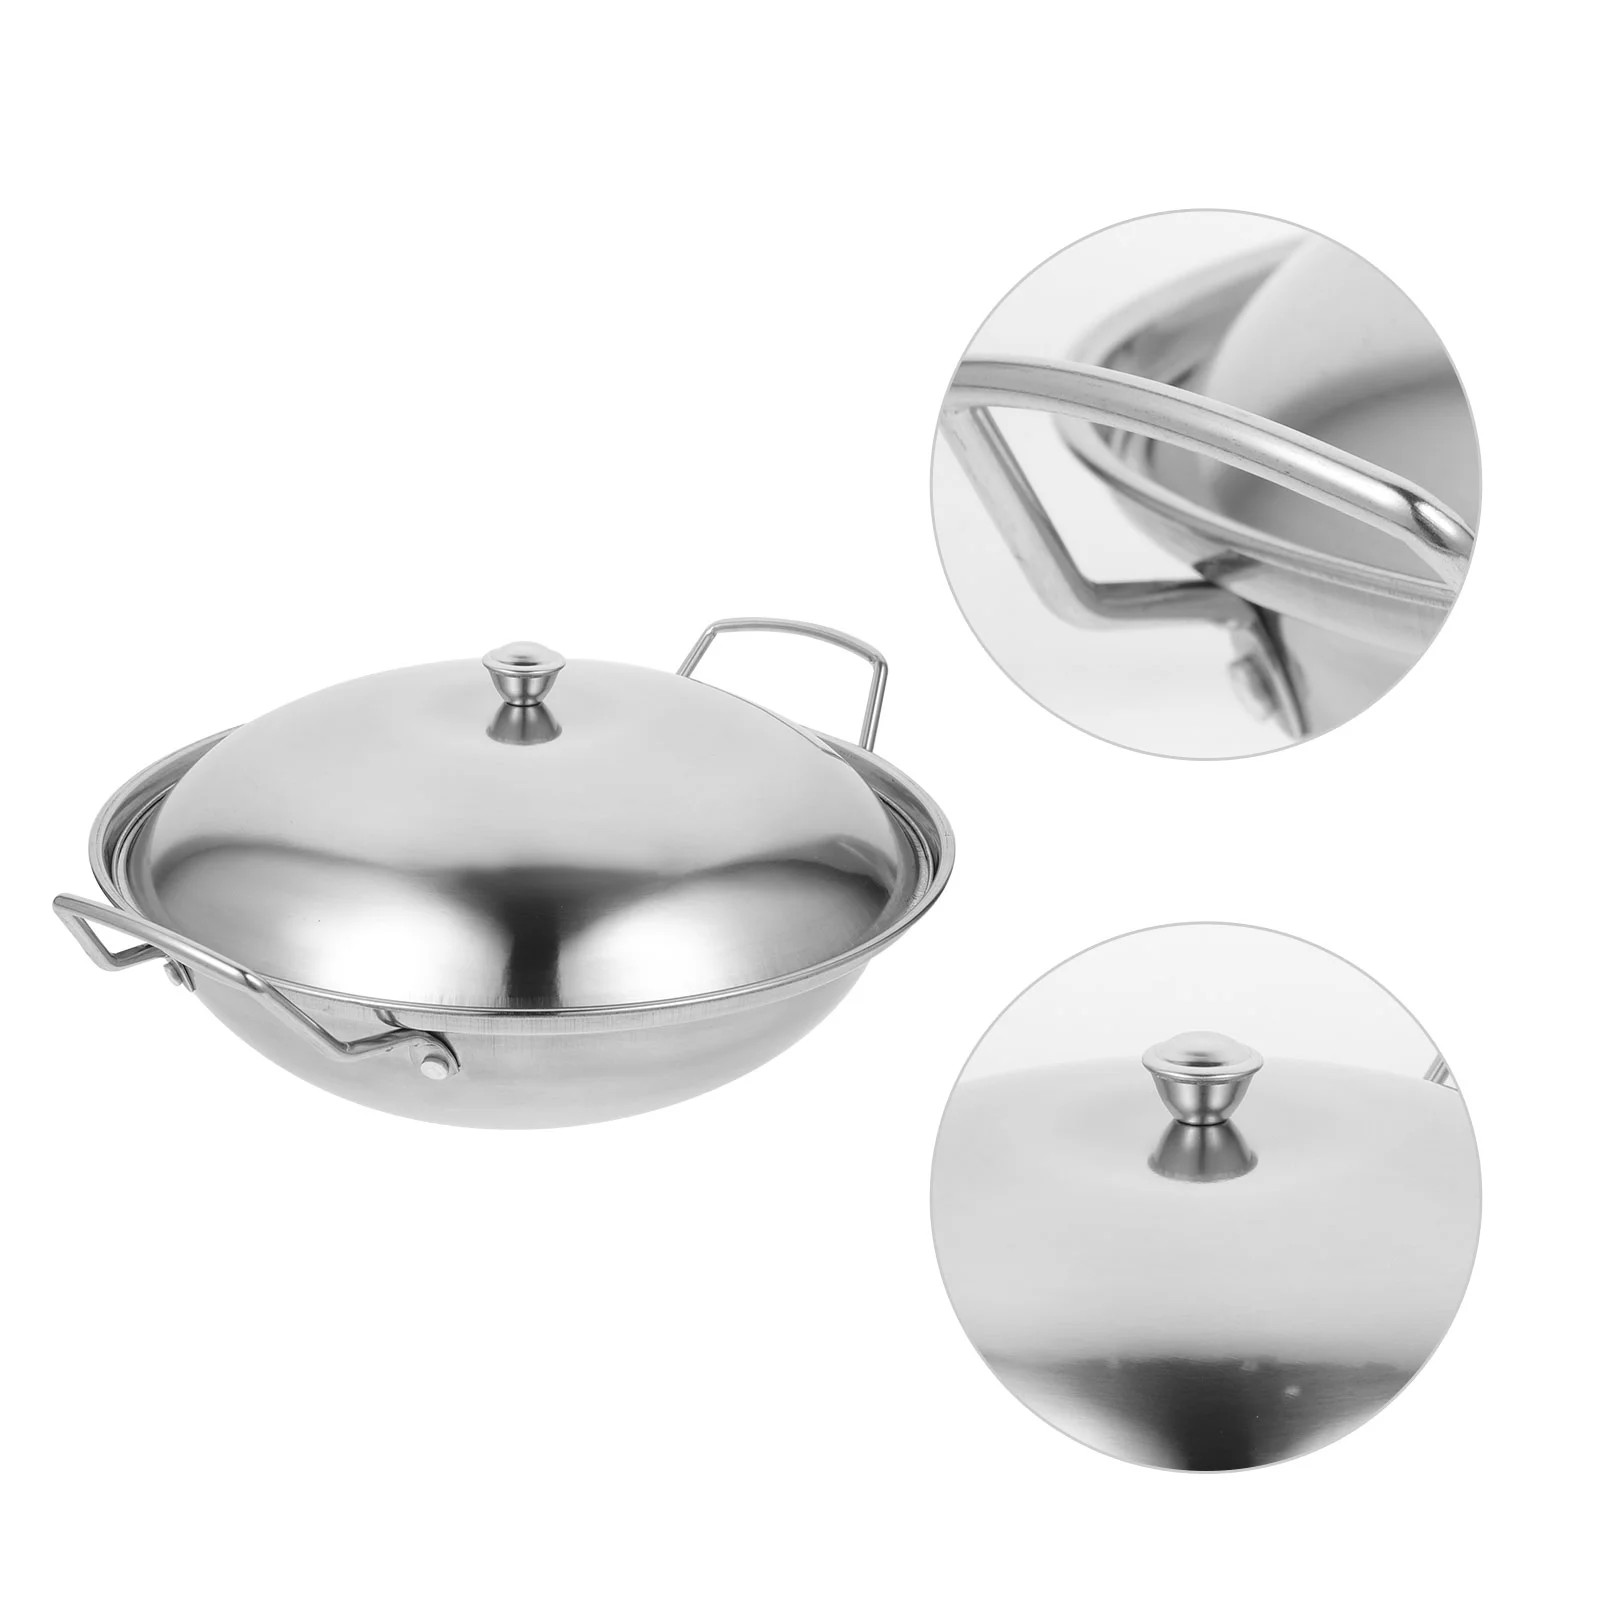 

Nonstick Cookware Carbon Steel Wok Pan Deep Frying Outdoor Griddle Chinese Stainless Saute Pow Stove Pot Lid